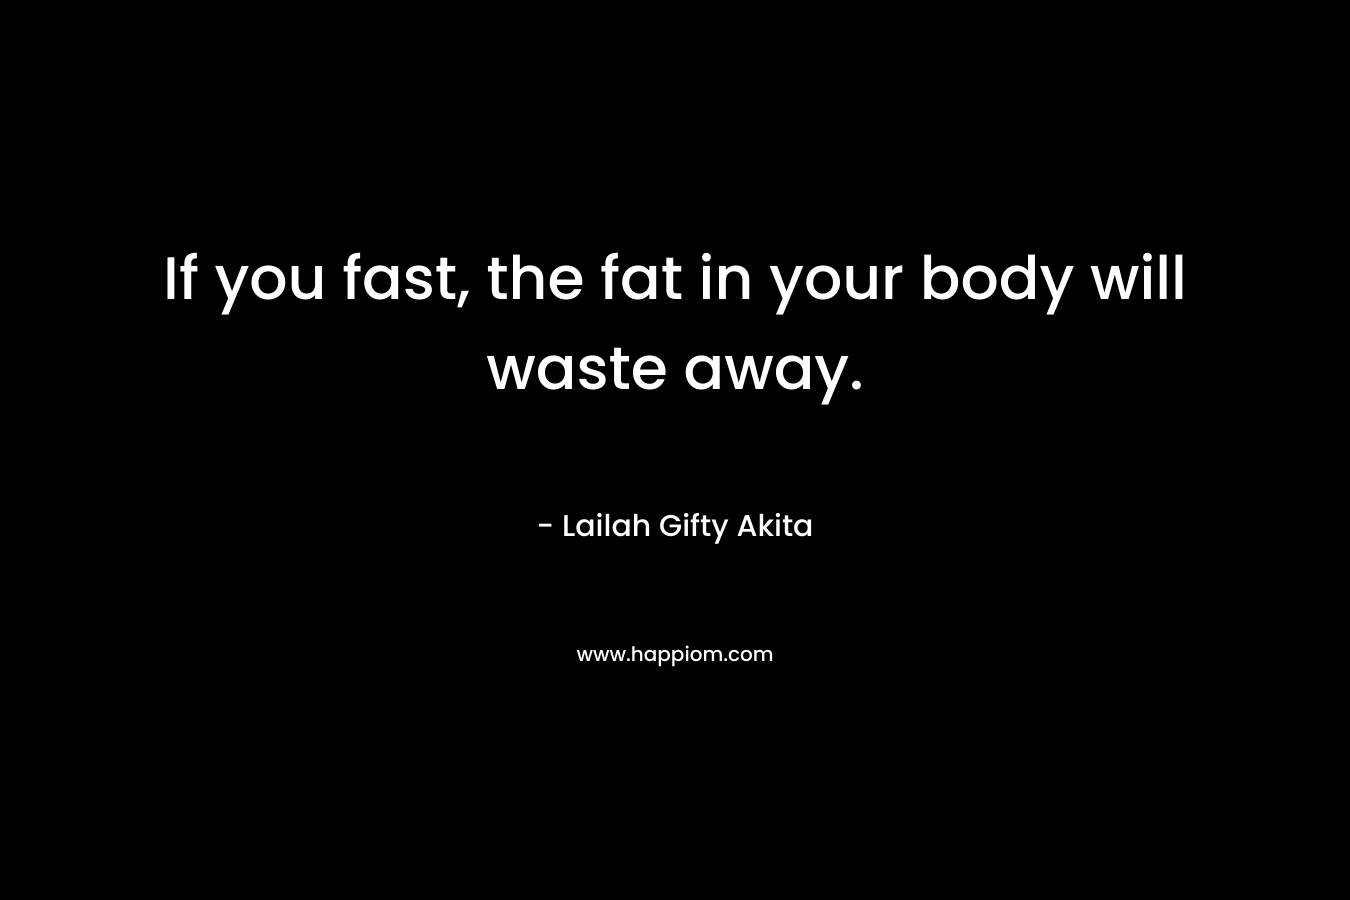 If you fast, the fat in your body will waste away. – Lailah Gifty Akita